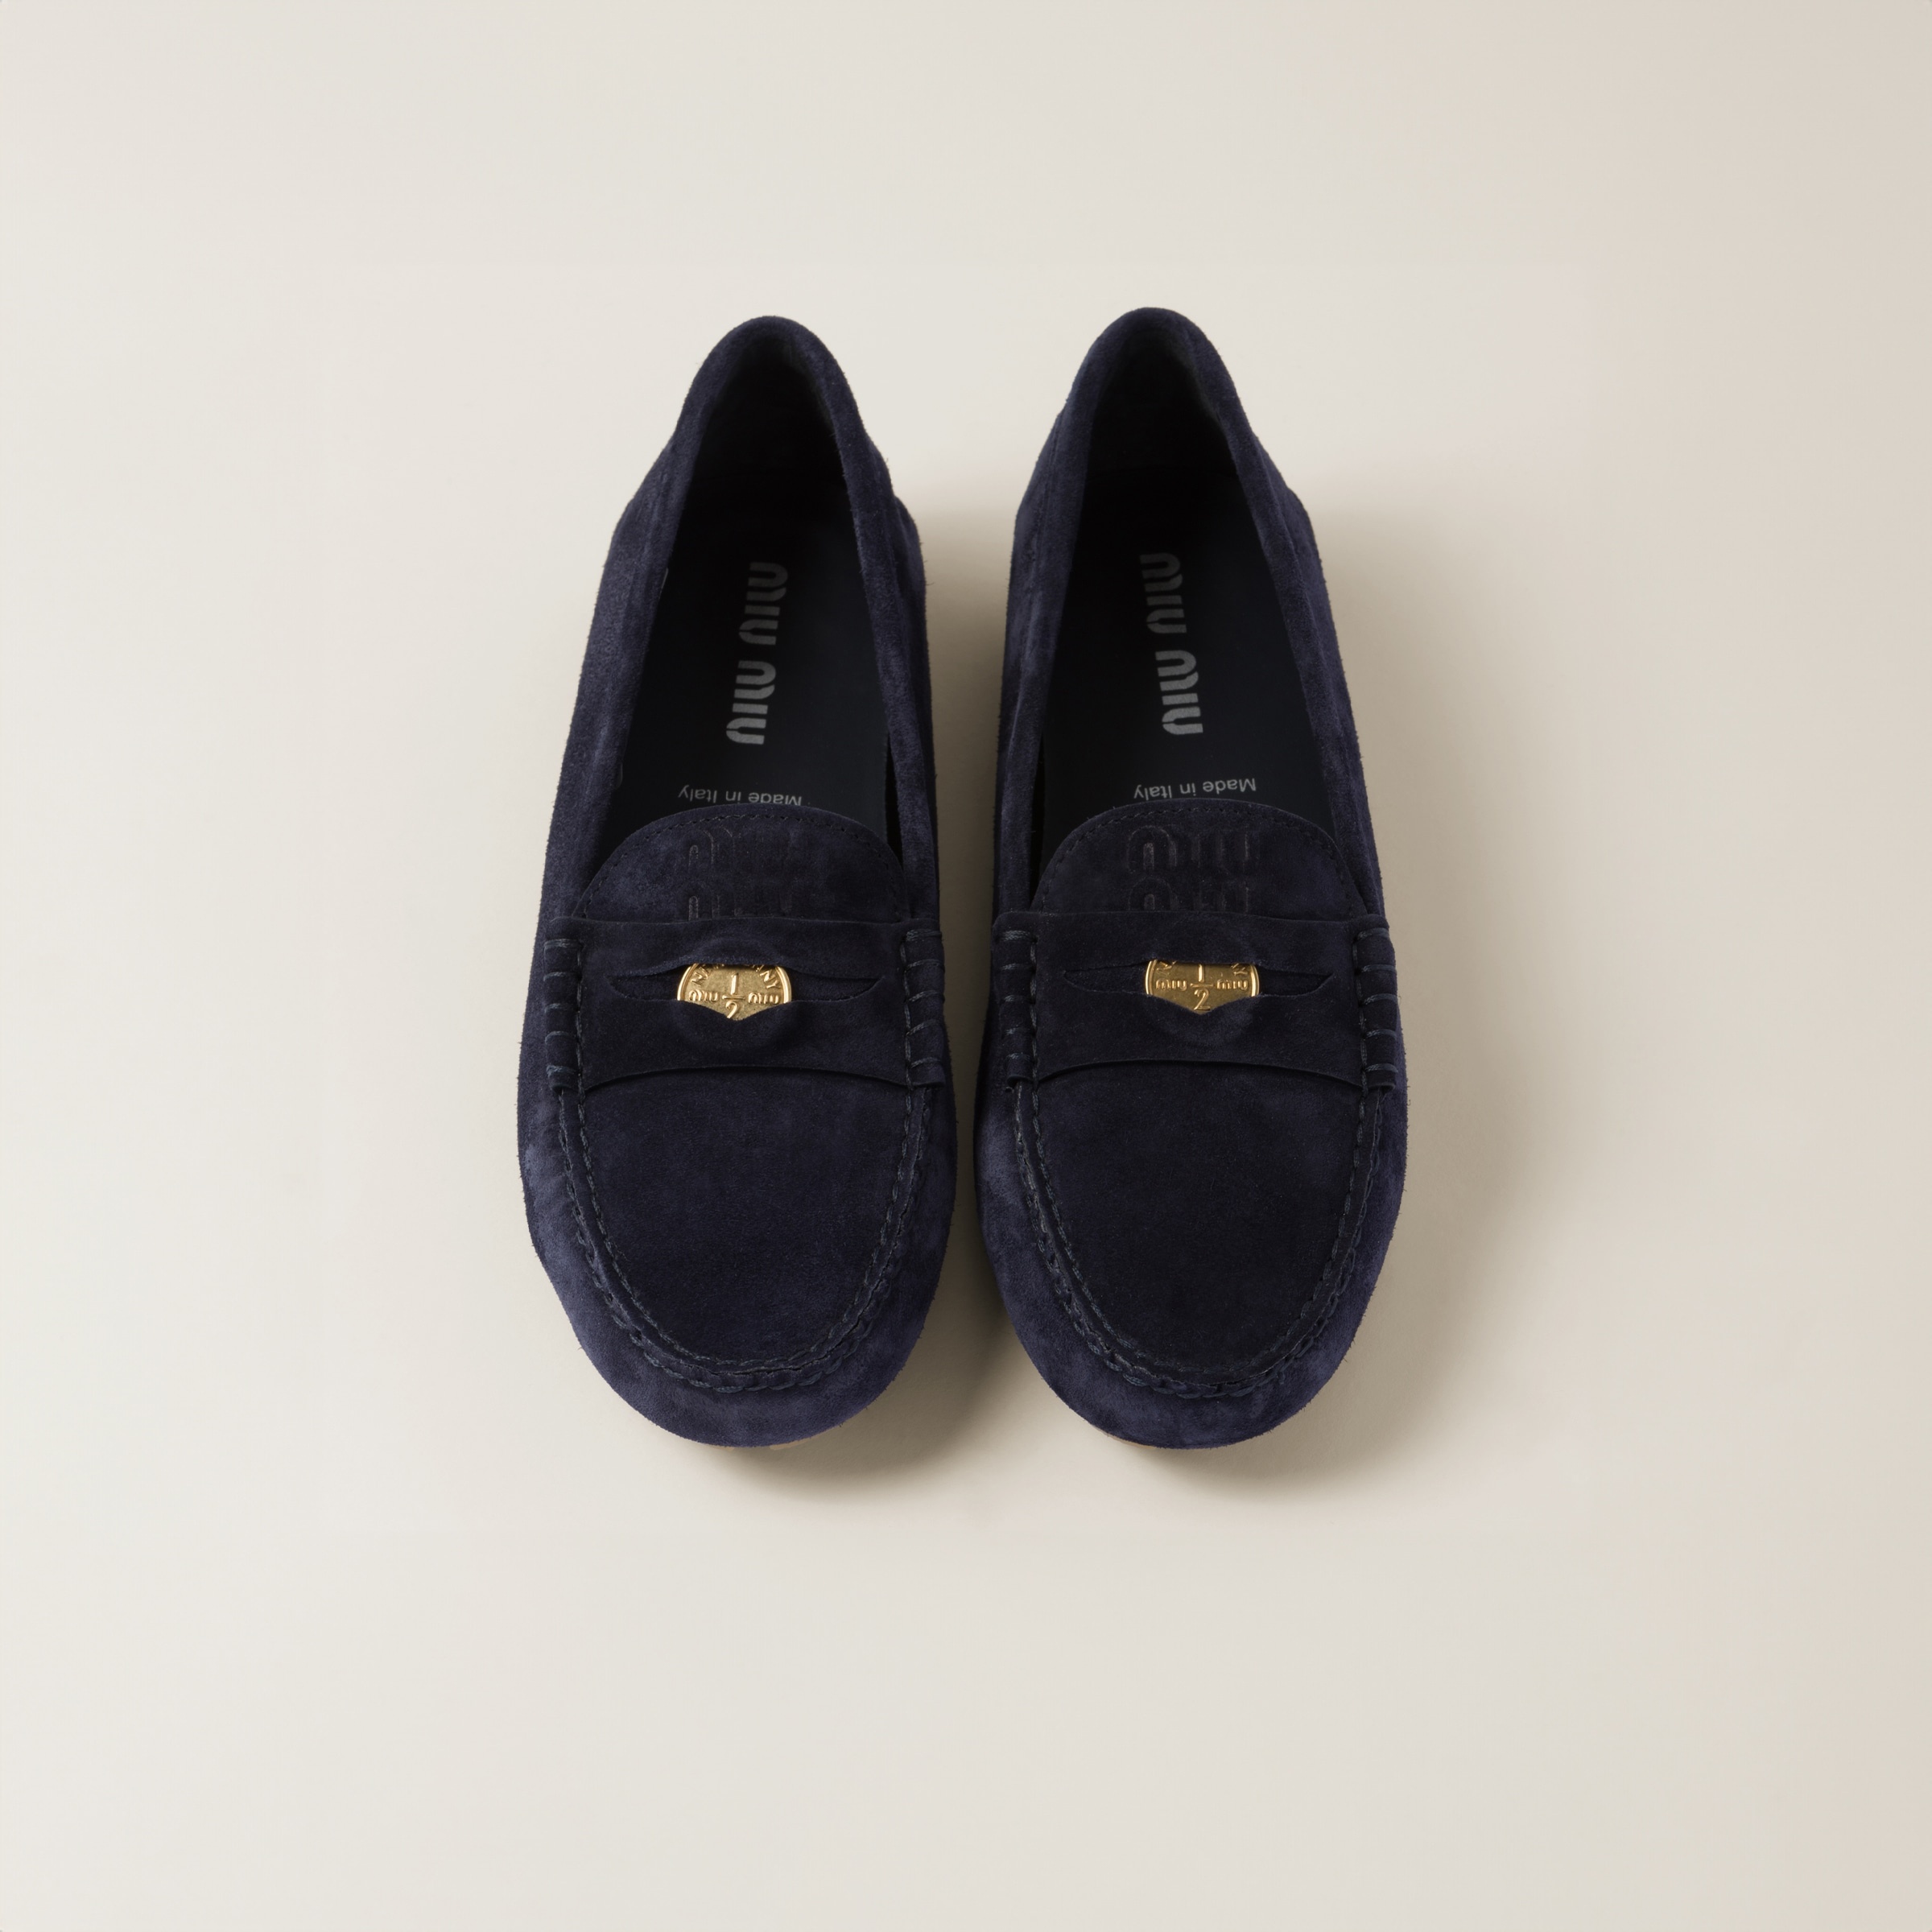 Suede driving shoes - 4